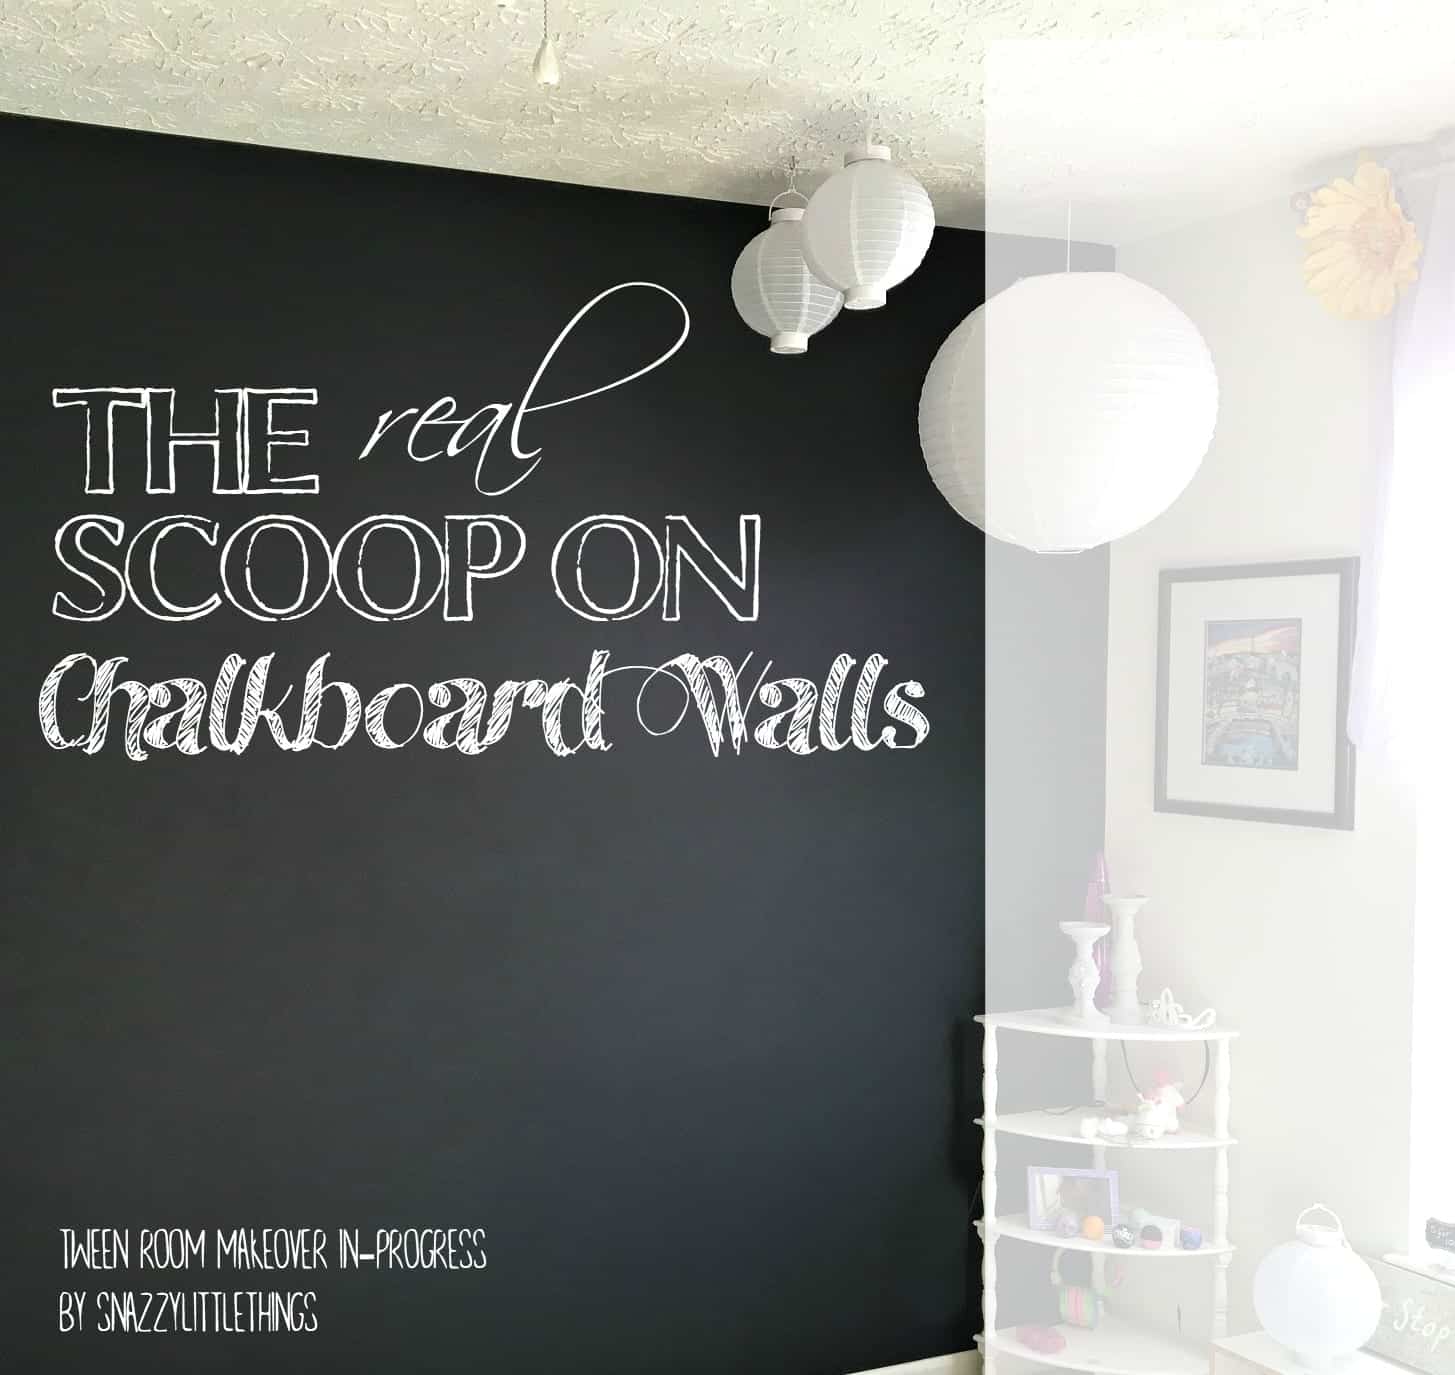 Chalkboard Fabric, Wallpaper and Home Decor